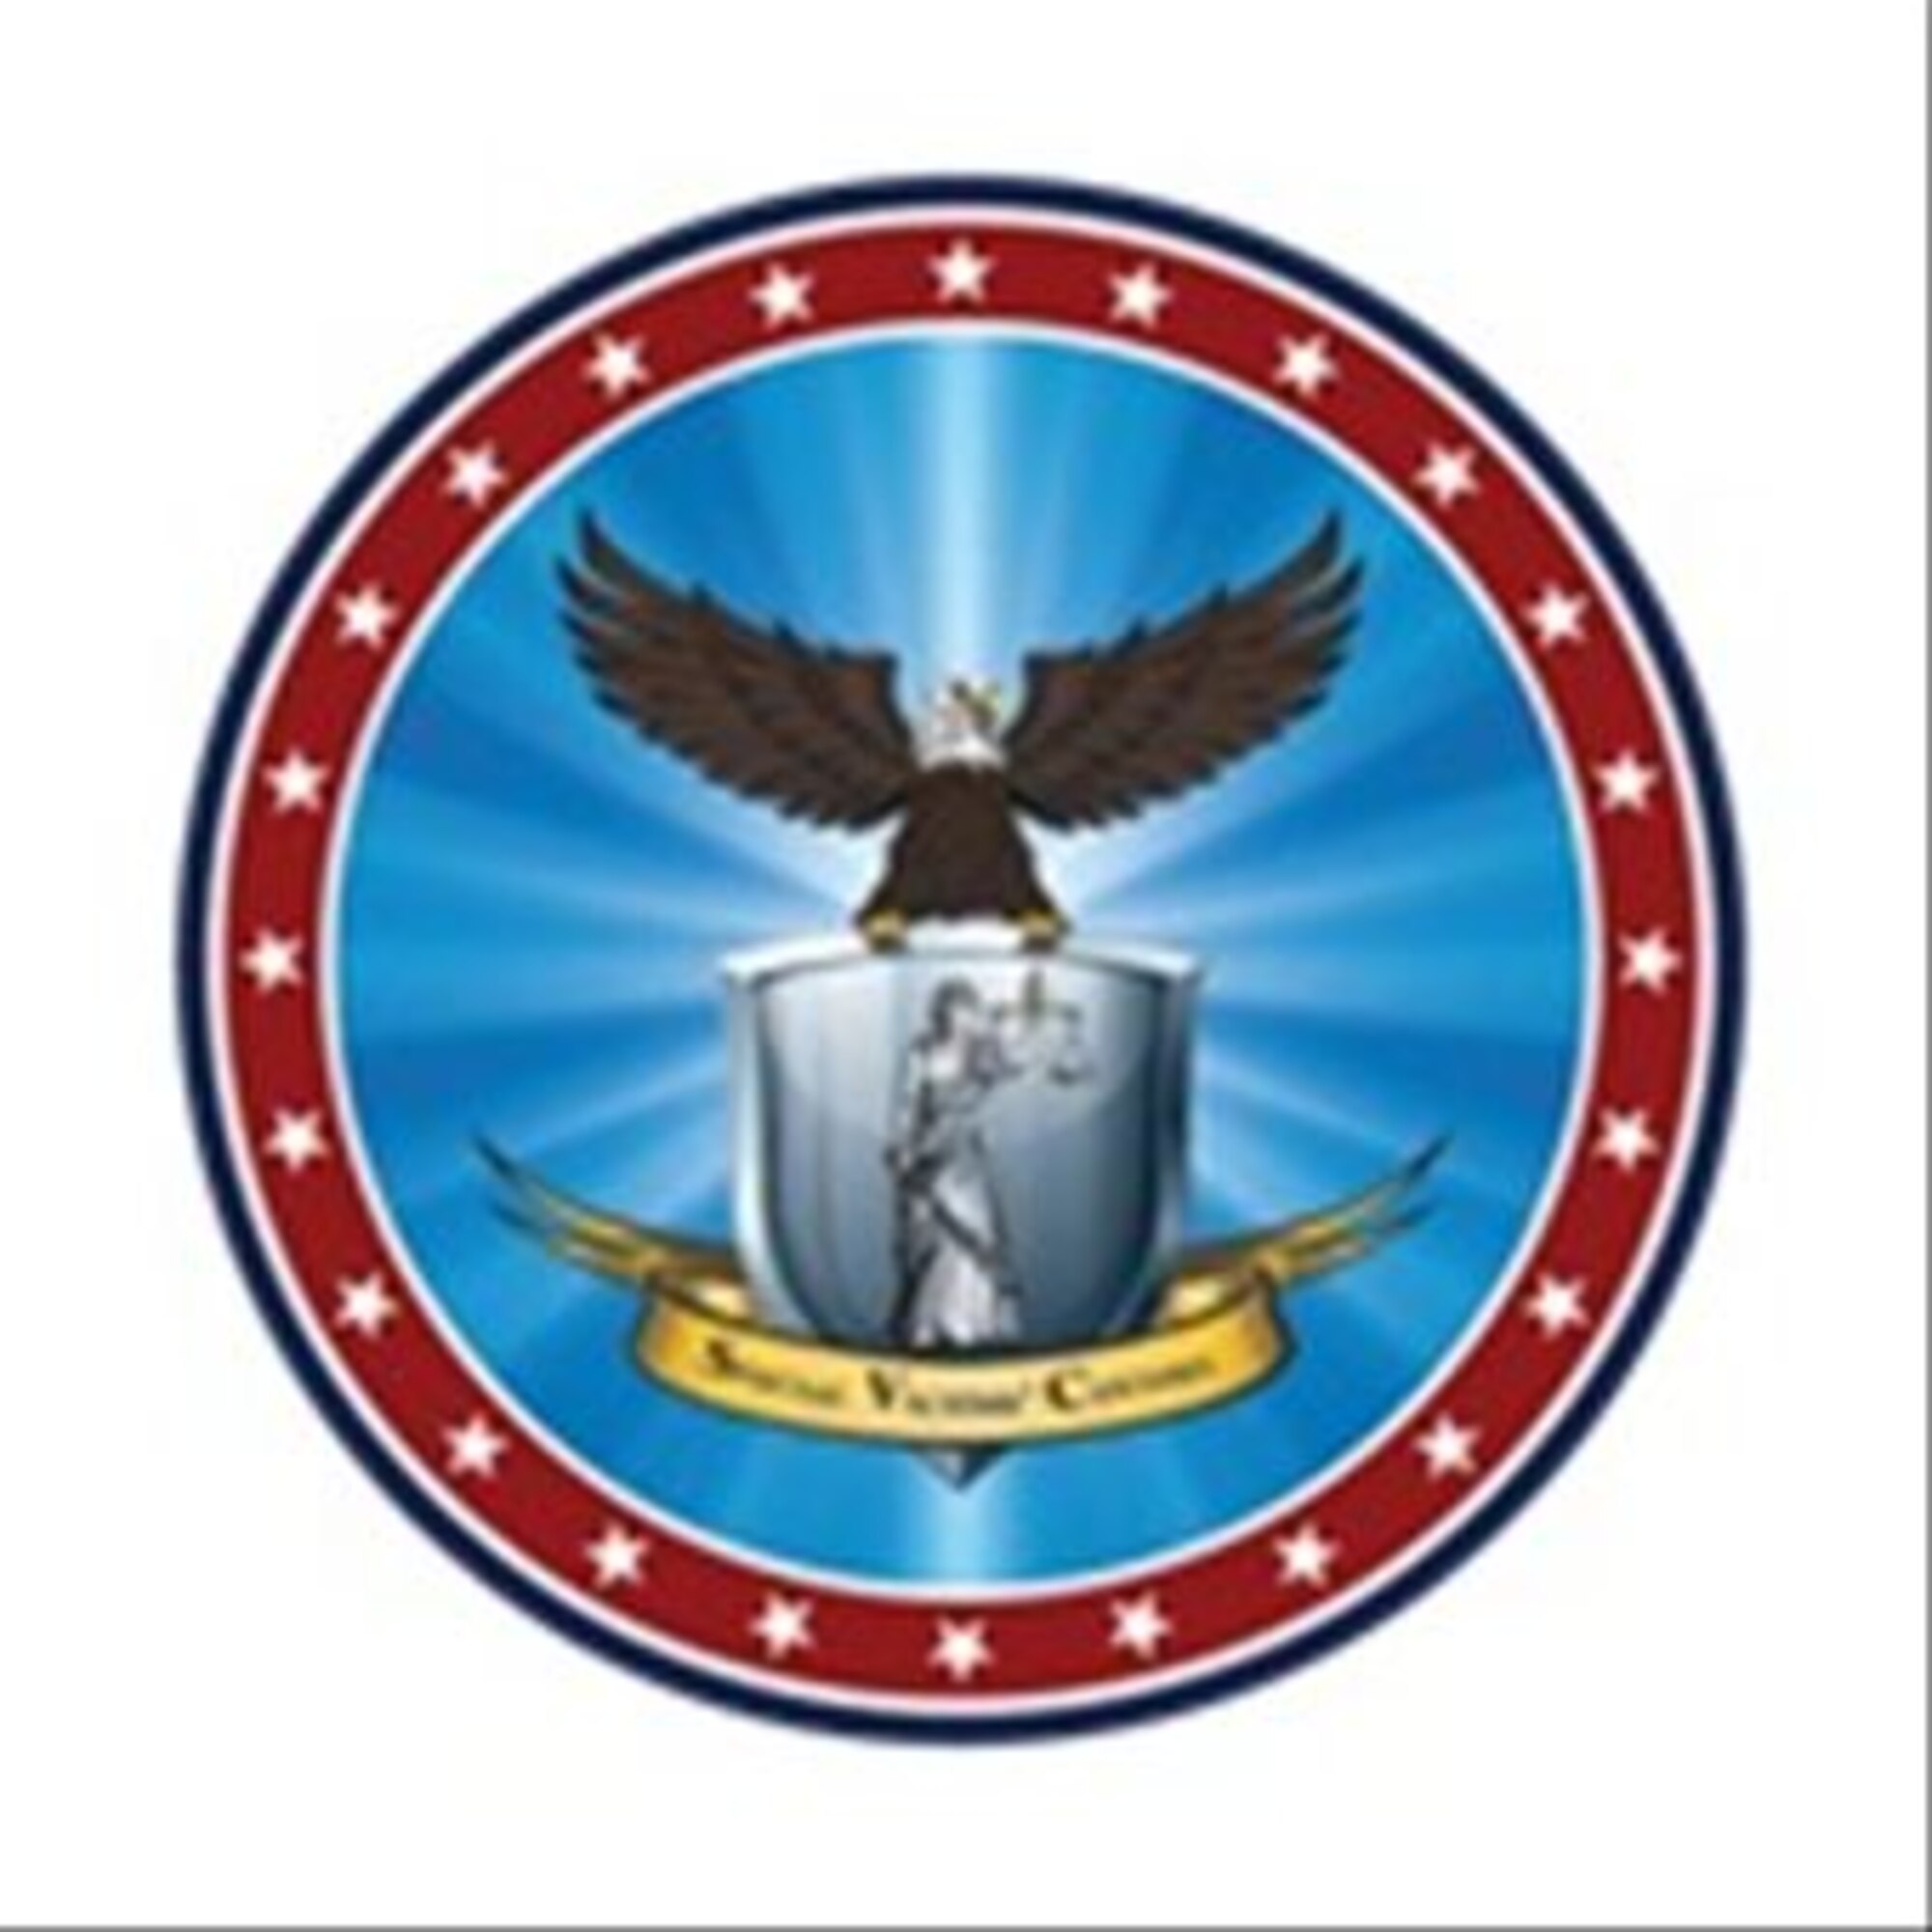 The SVCs primary mission is the representation of victims of sexual assault and the complete safeguarding and confidentiality of any discussions between them and the client. They also serve as advocates to commanders on behalf of victims, attend interviews with law enforcement or other attorneys and work to protect victims’ privacy rights and overall dignity during the court-martial process. 
(Air Force Graphic)